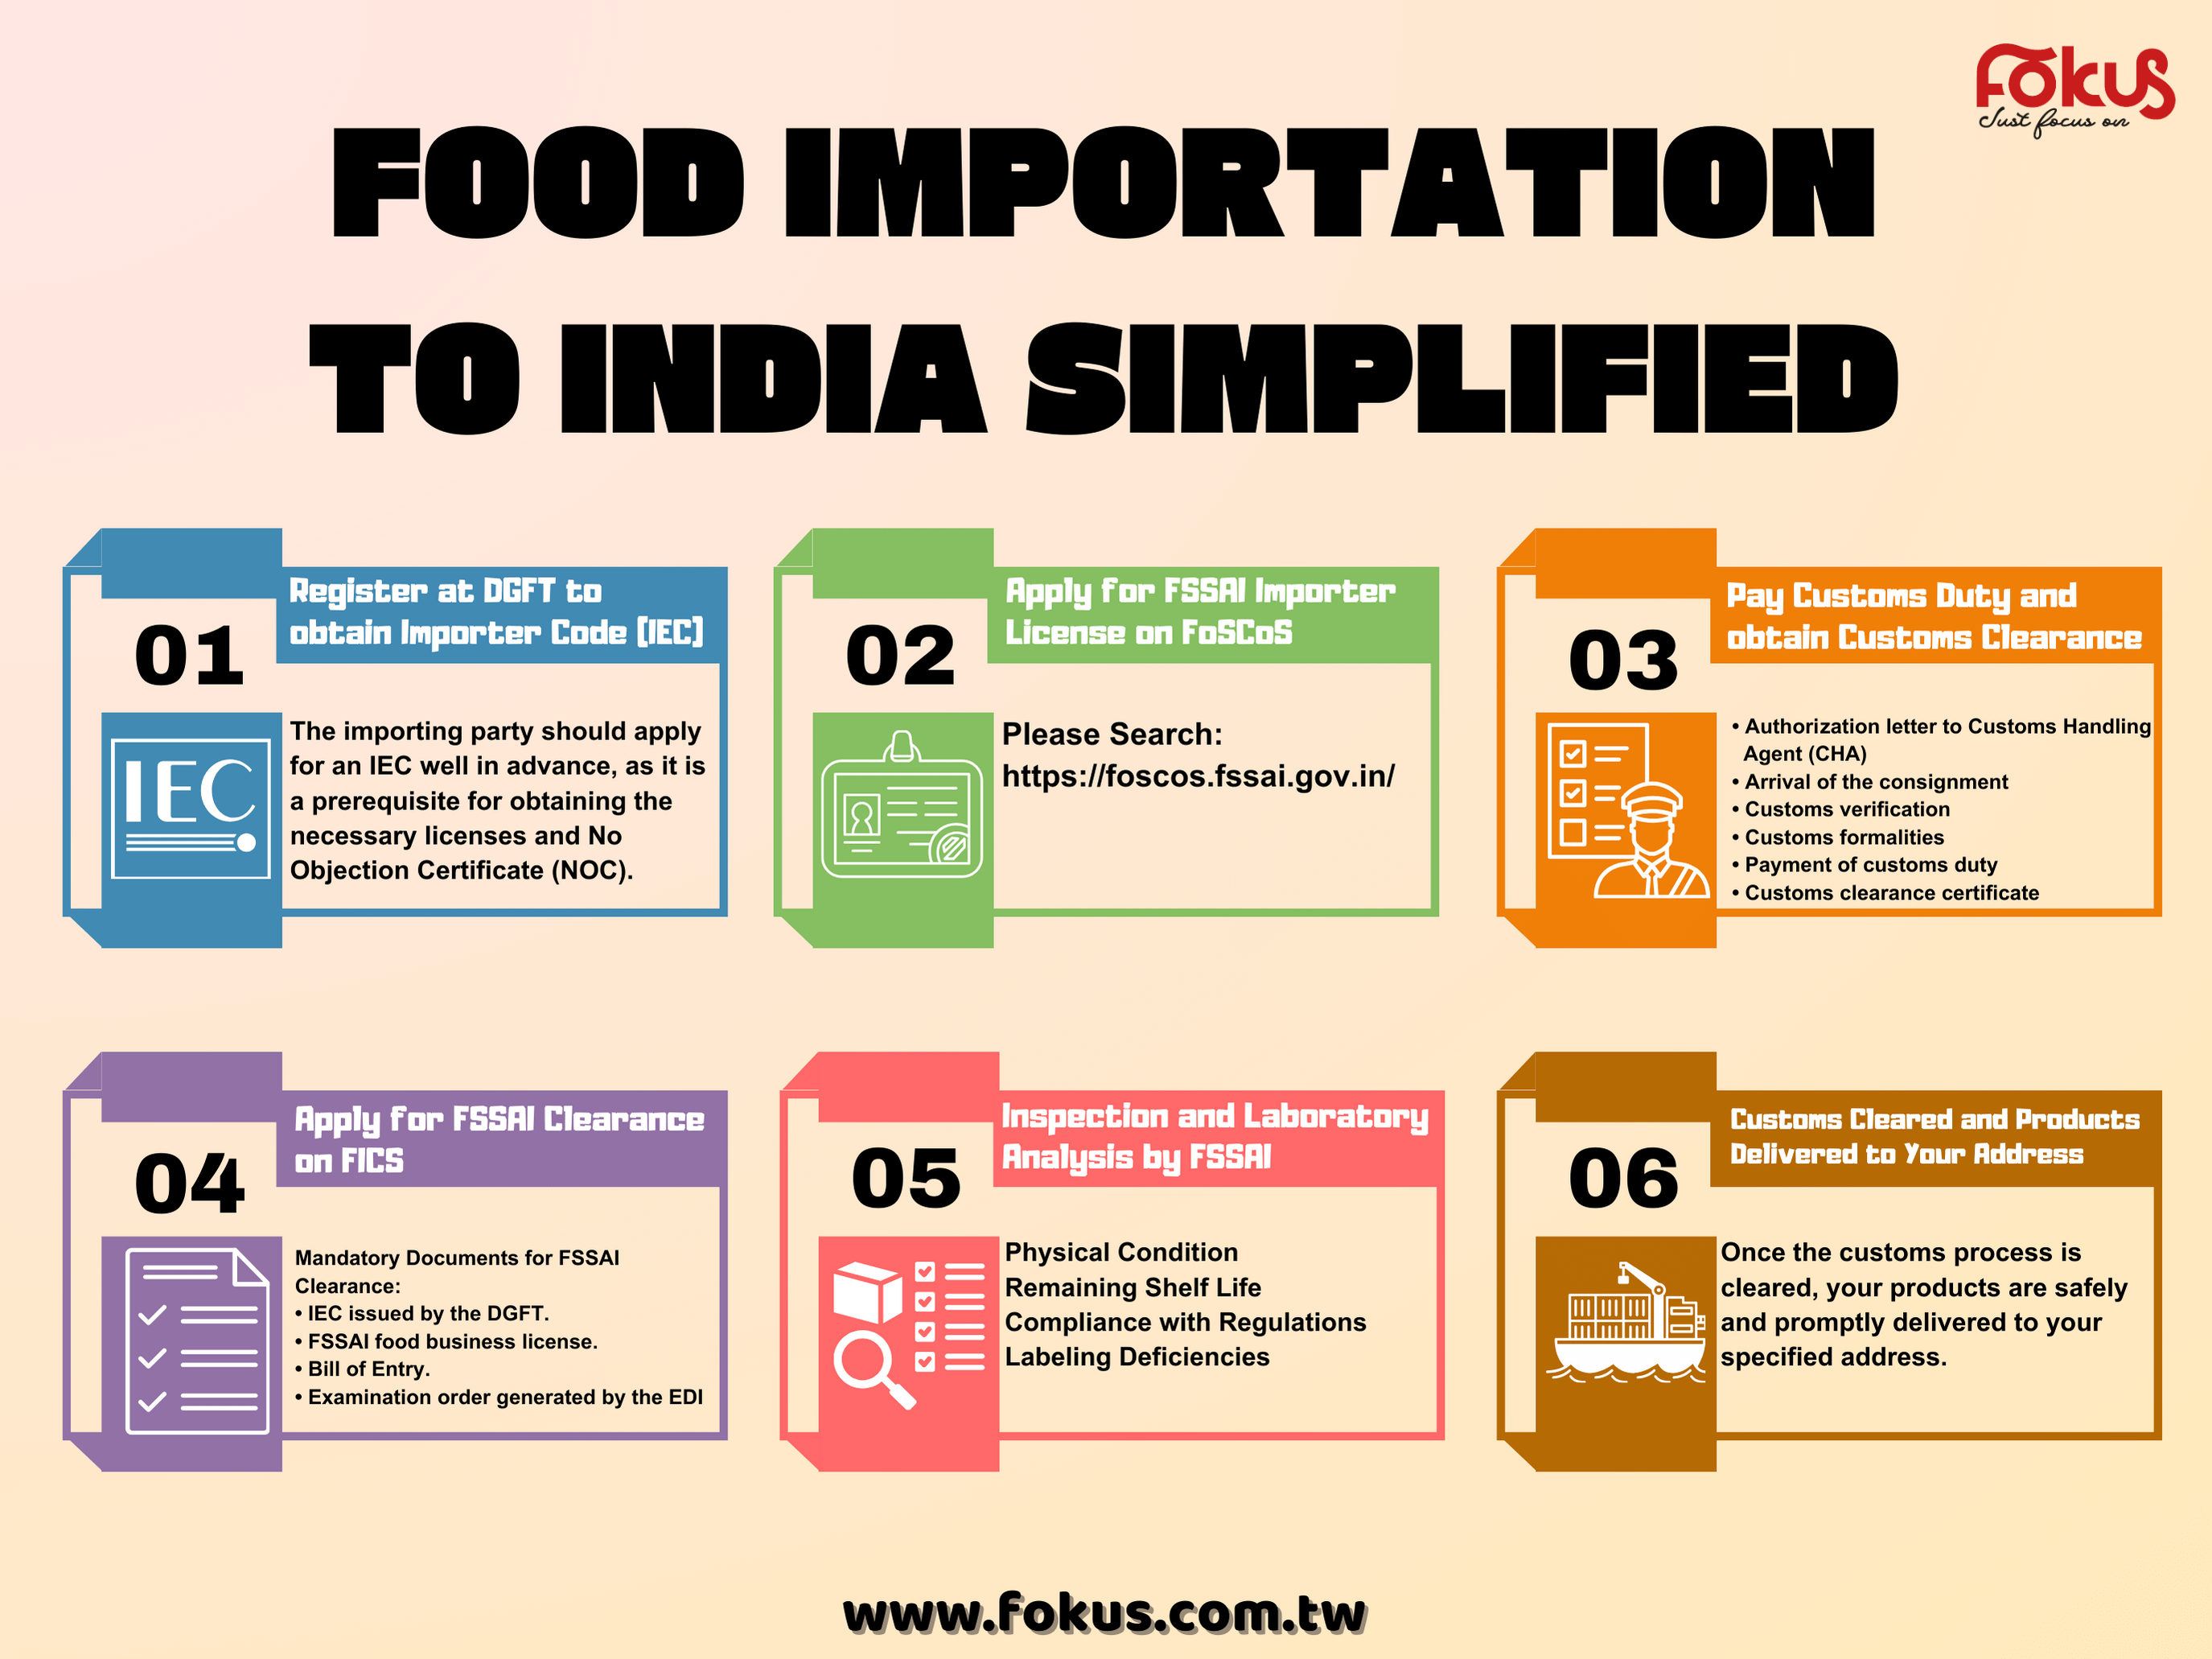 Food Importation to India Simplified